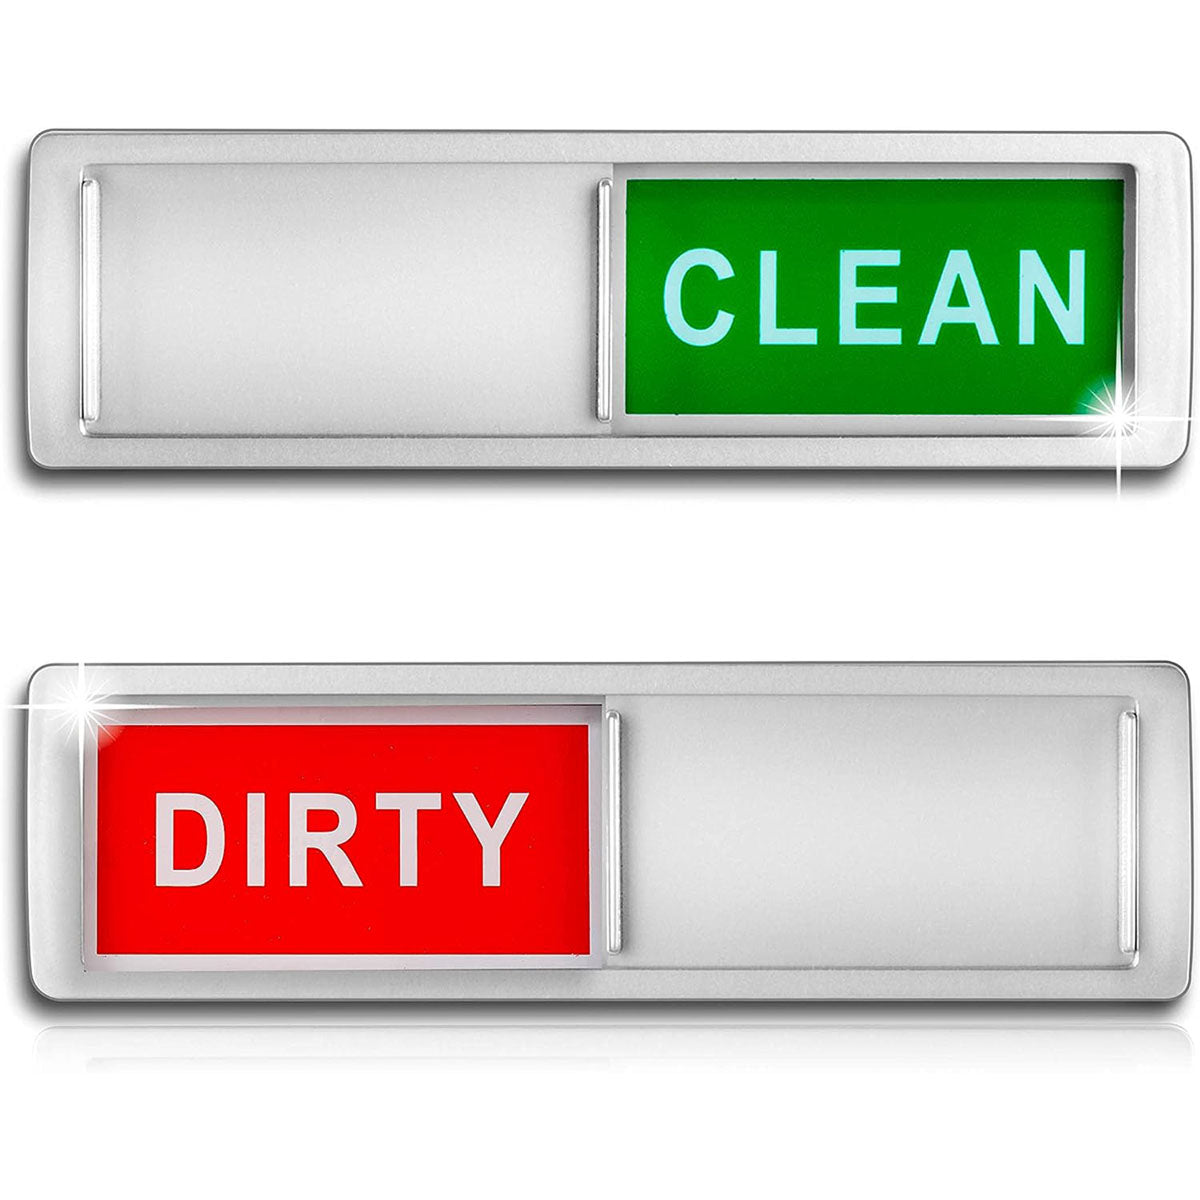 Clean Dirty Dishwasher Sign - Sleek Design - Kitchen Gadgets - Heavy Duty Magnet with Optional Stickers